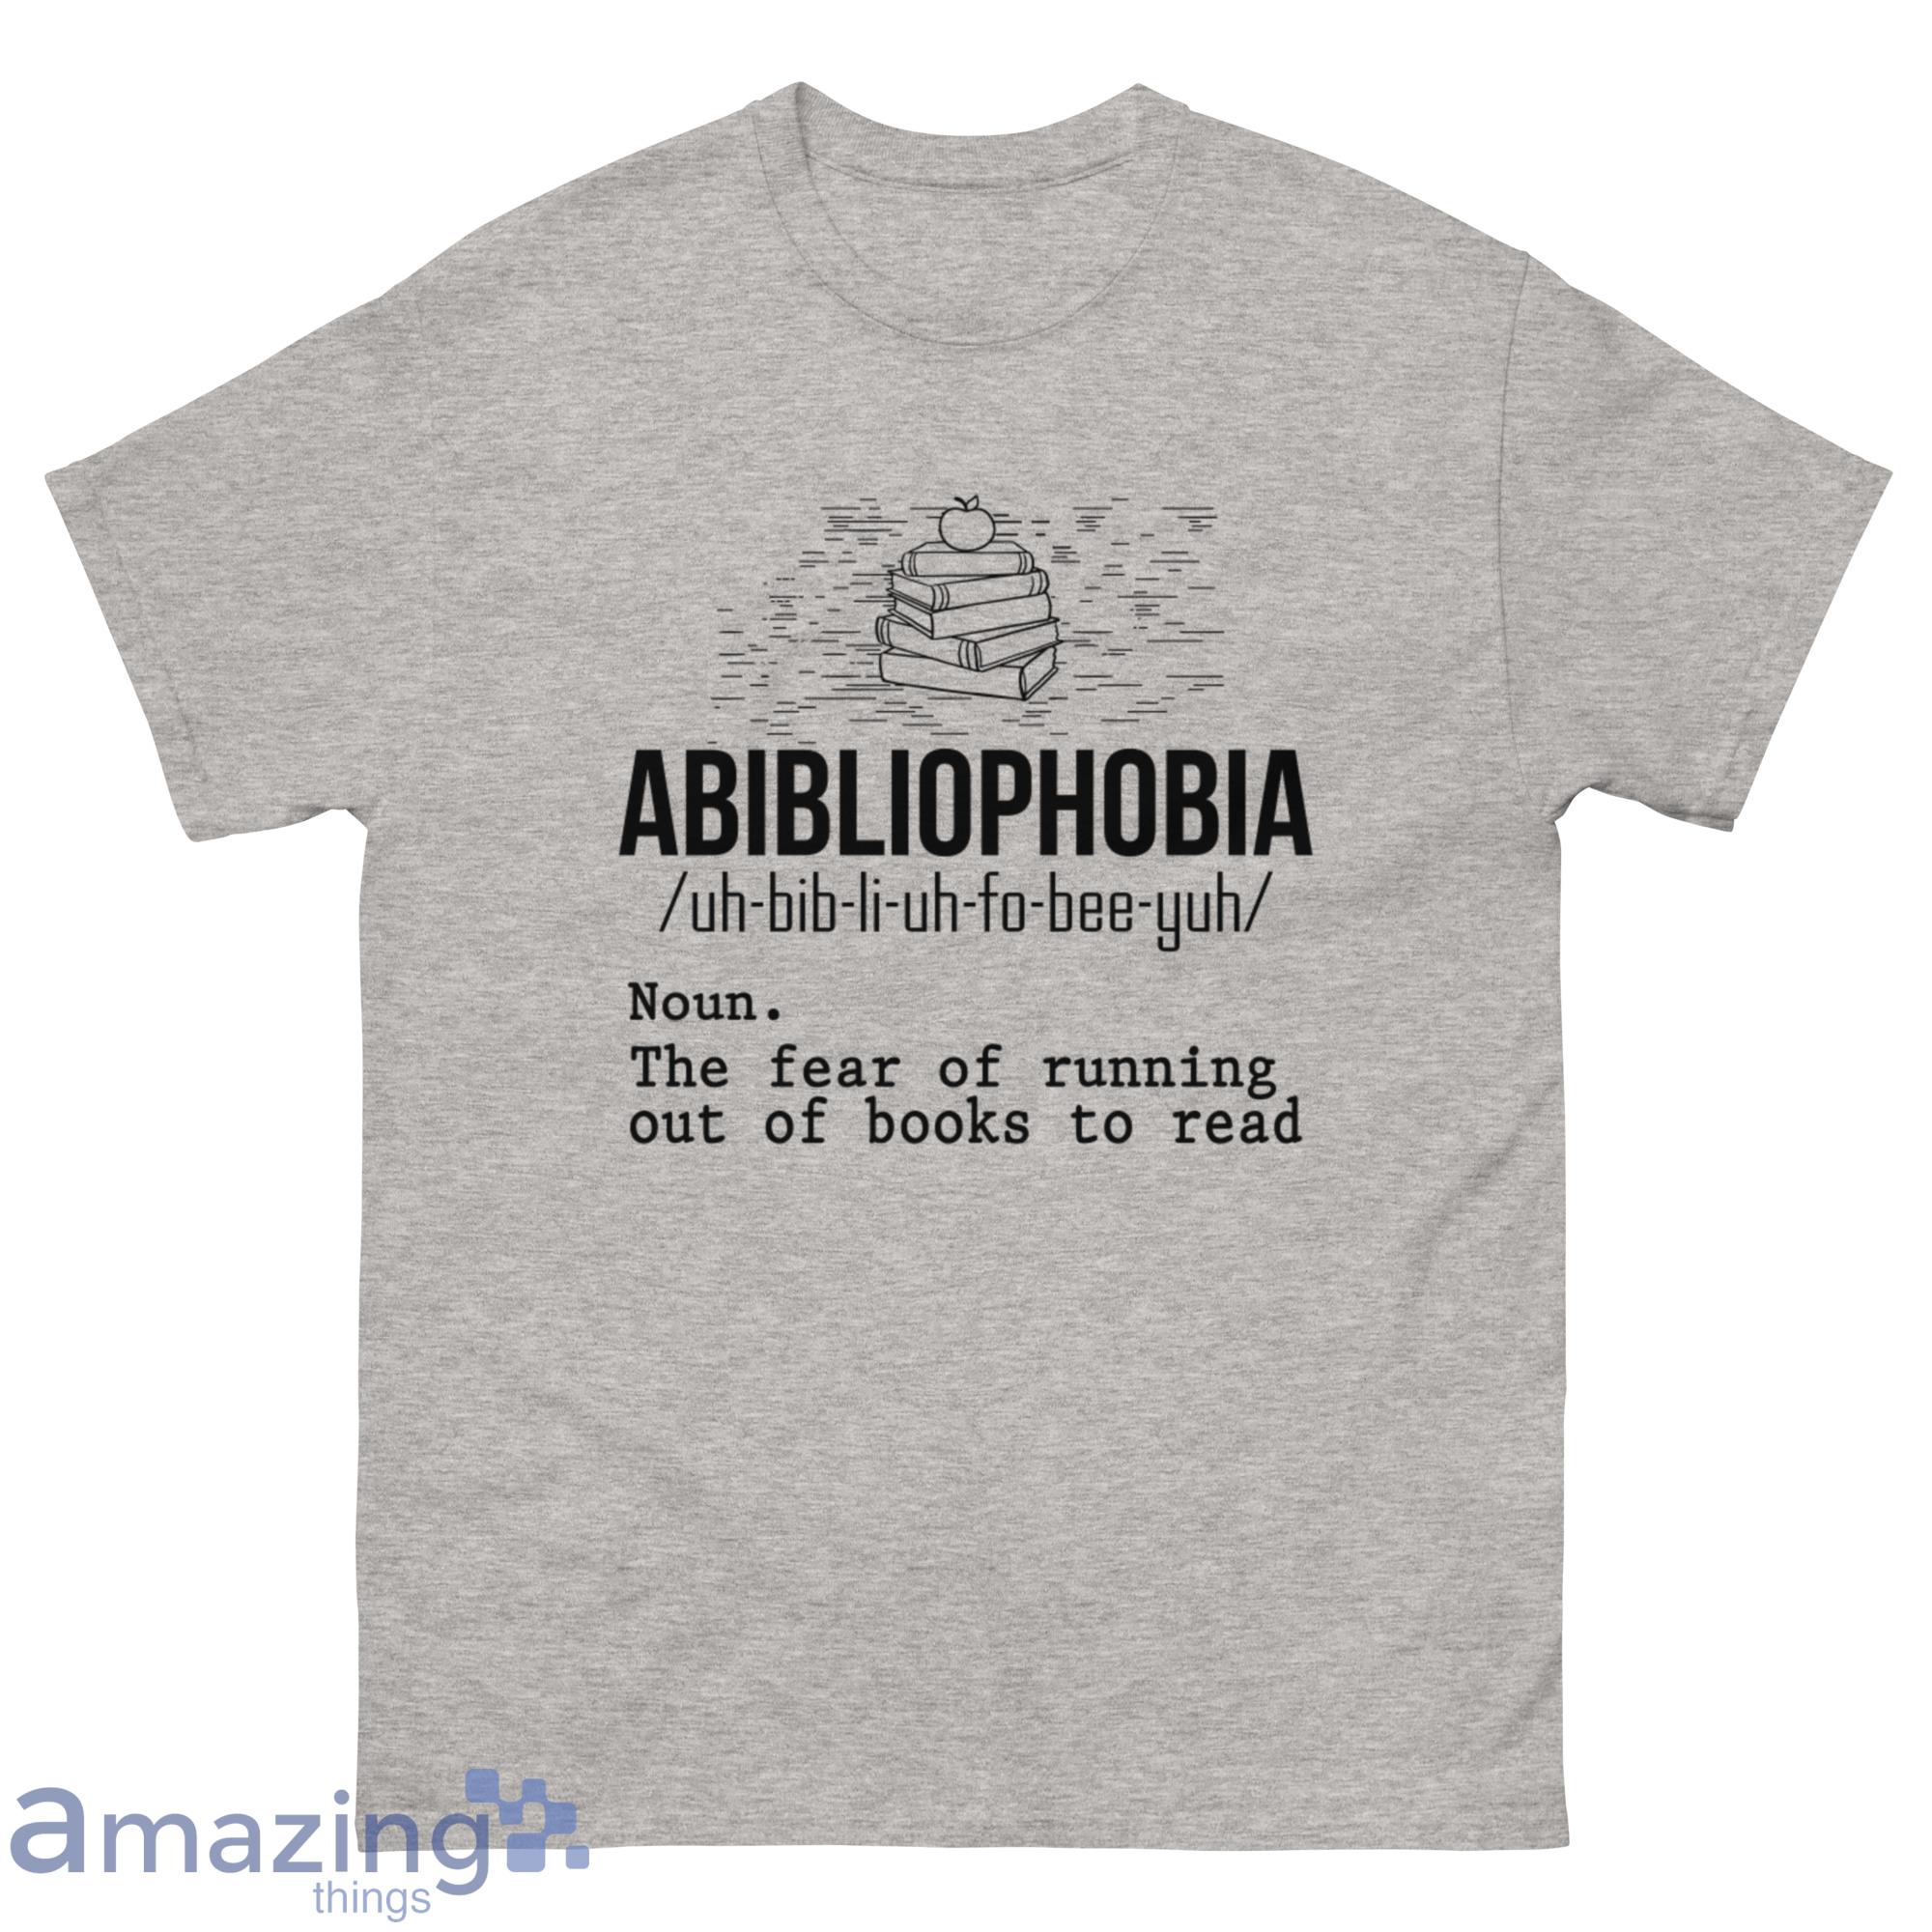 Abibliophobia (Noun) The Fear Of Running Out Of Books To Read Shirt - G500 Men’s Classic T-Shirt